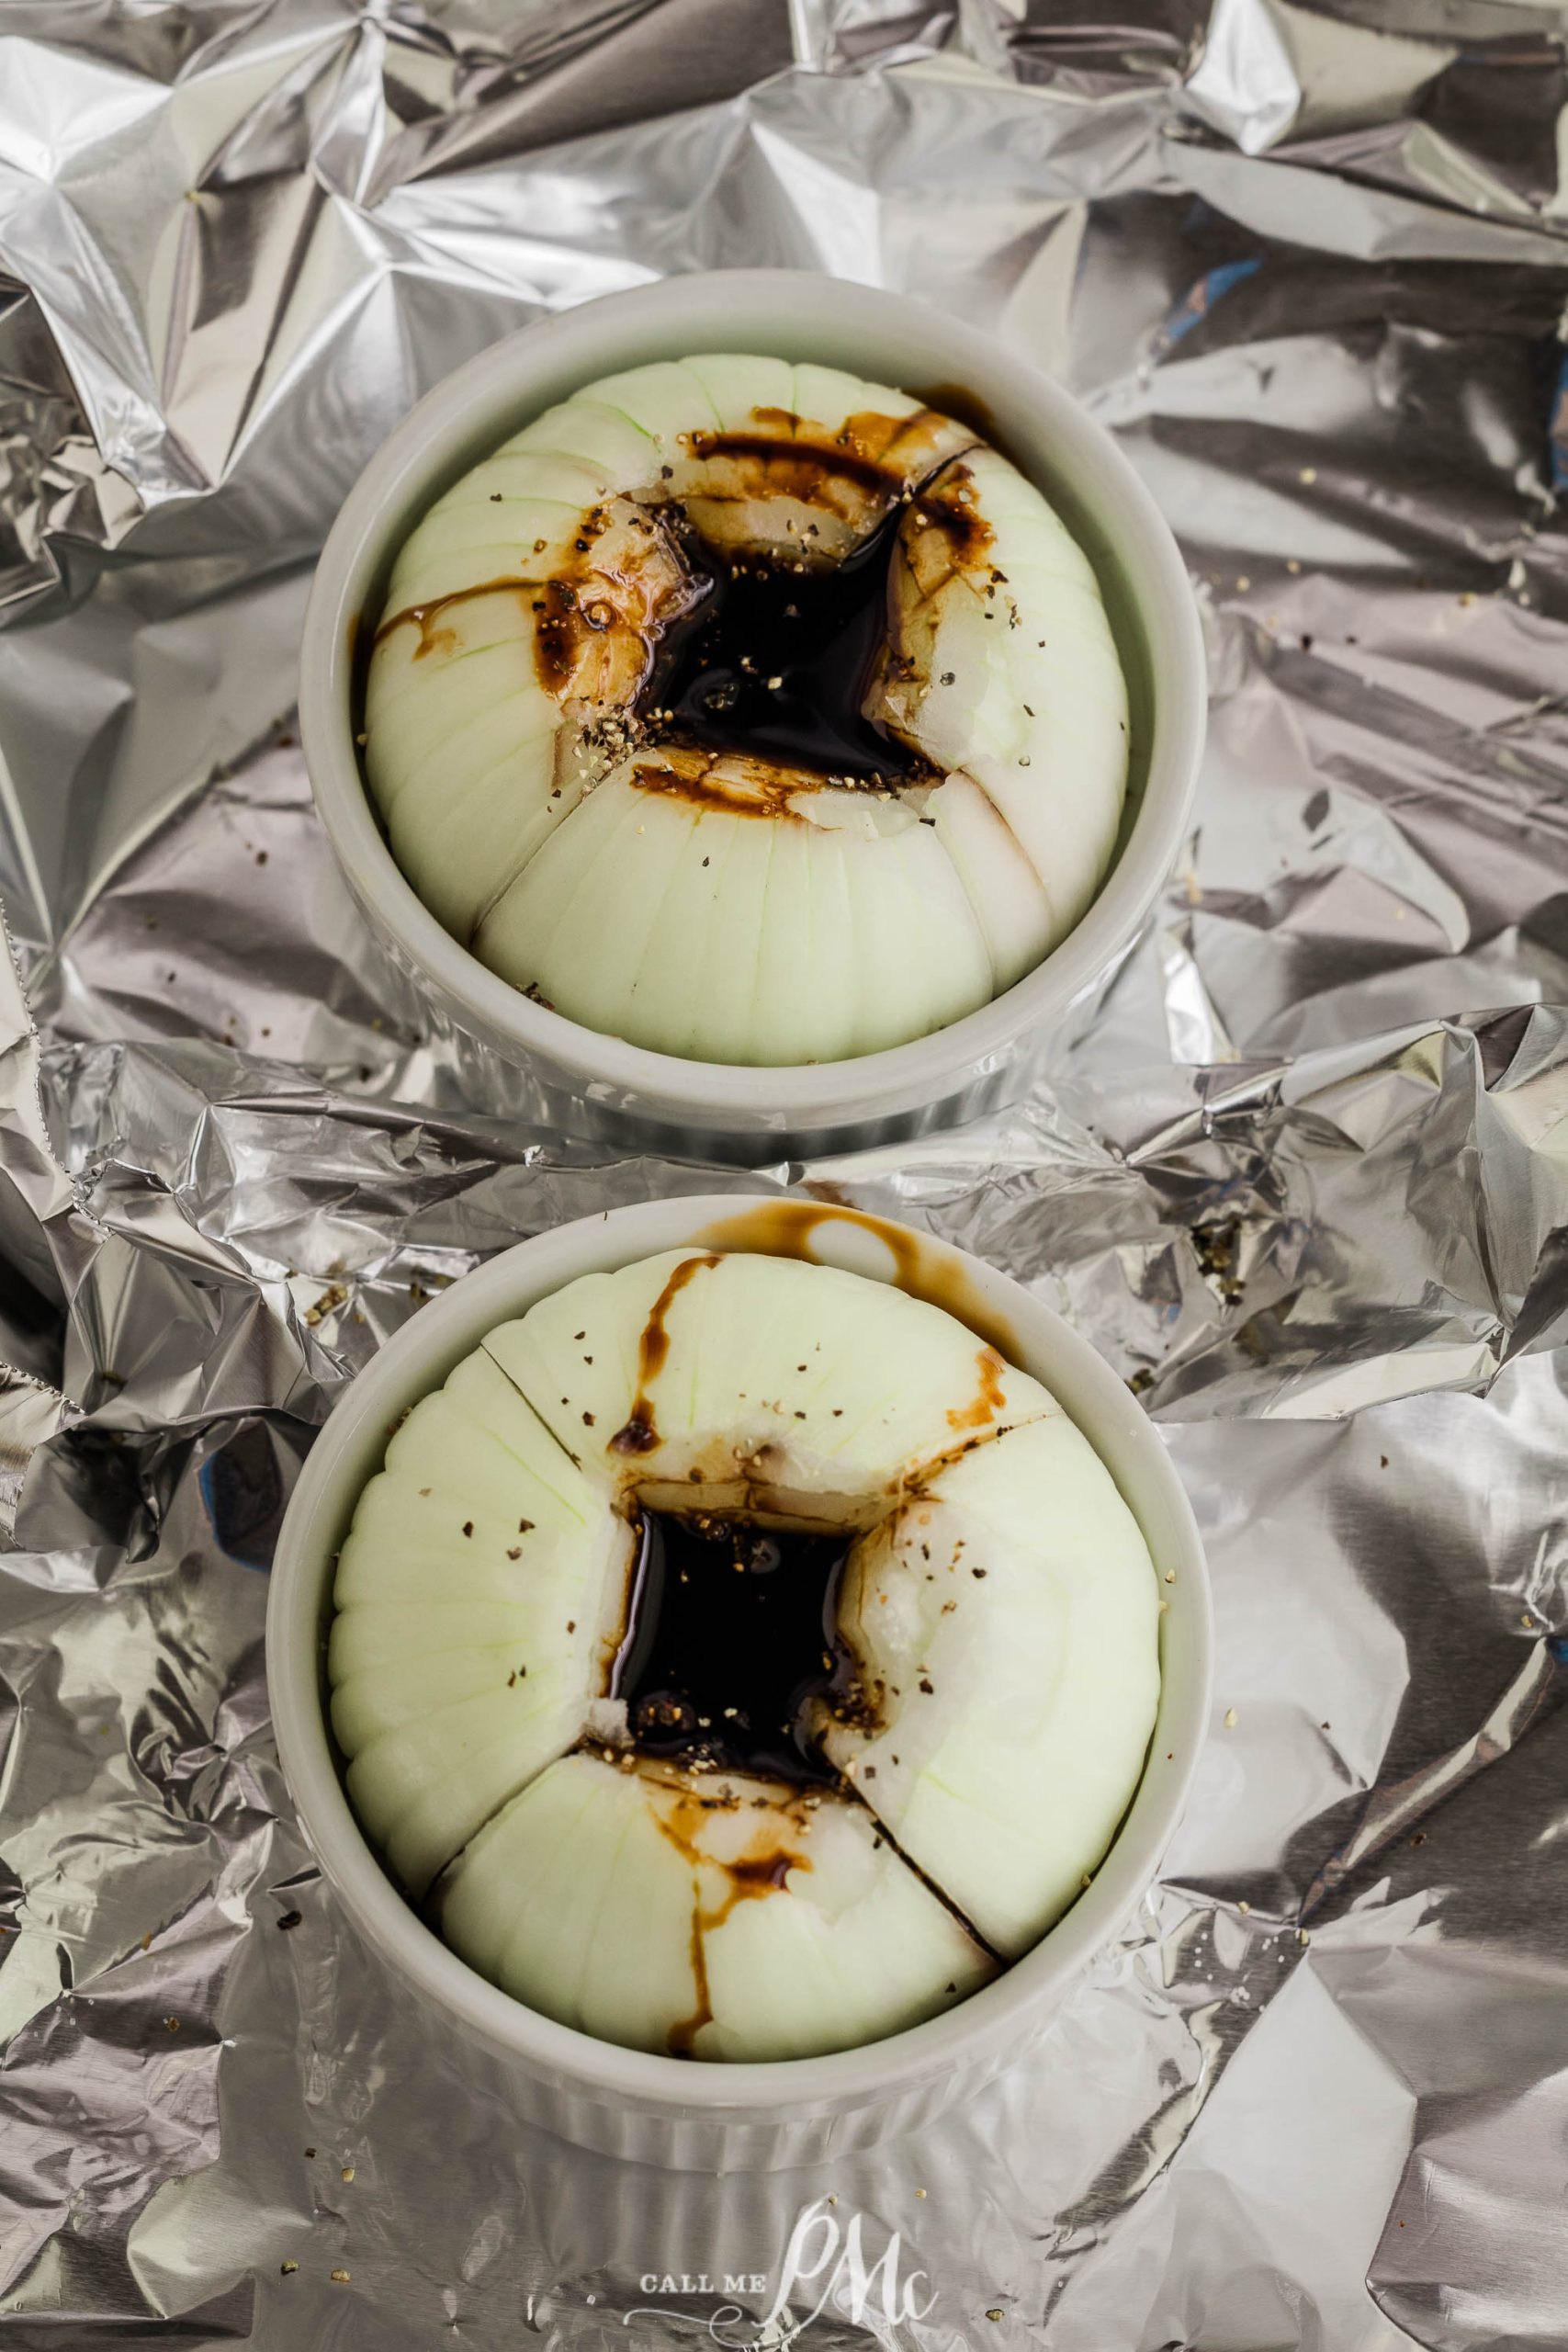 Two partially cut onions sit in white ramekins, filled with balsamic glaze and seasoning, placed on a crinkled aluminum foil background.